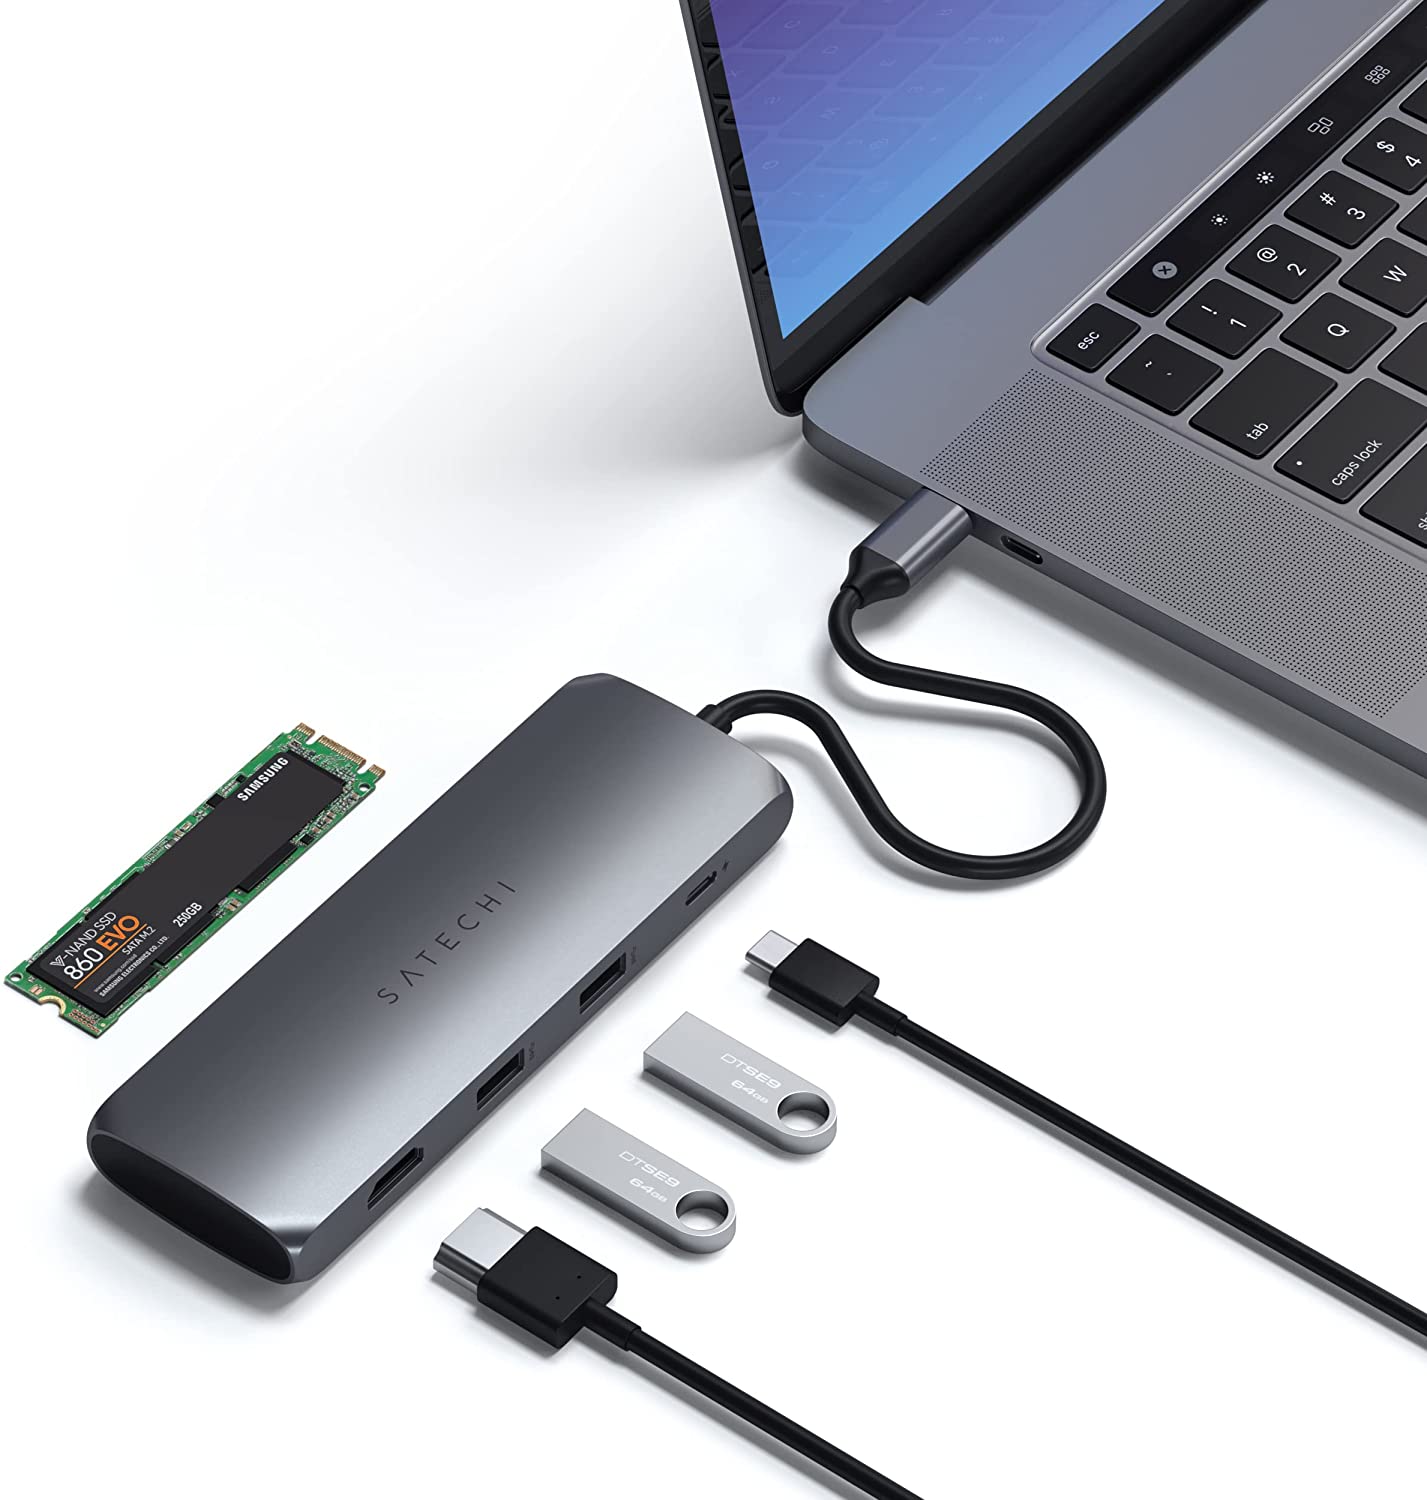 USB-C Hybrid Multiport Adapter Has a Hidden SSD Slot | Here's What SSDs are Compatible with Satechi's Extension